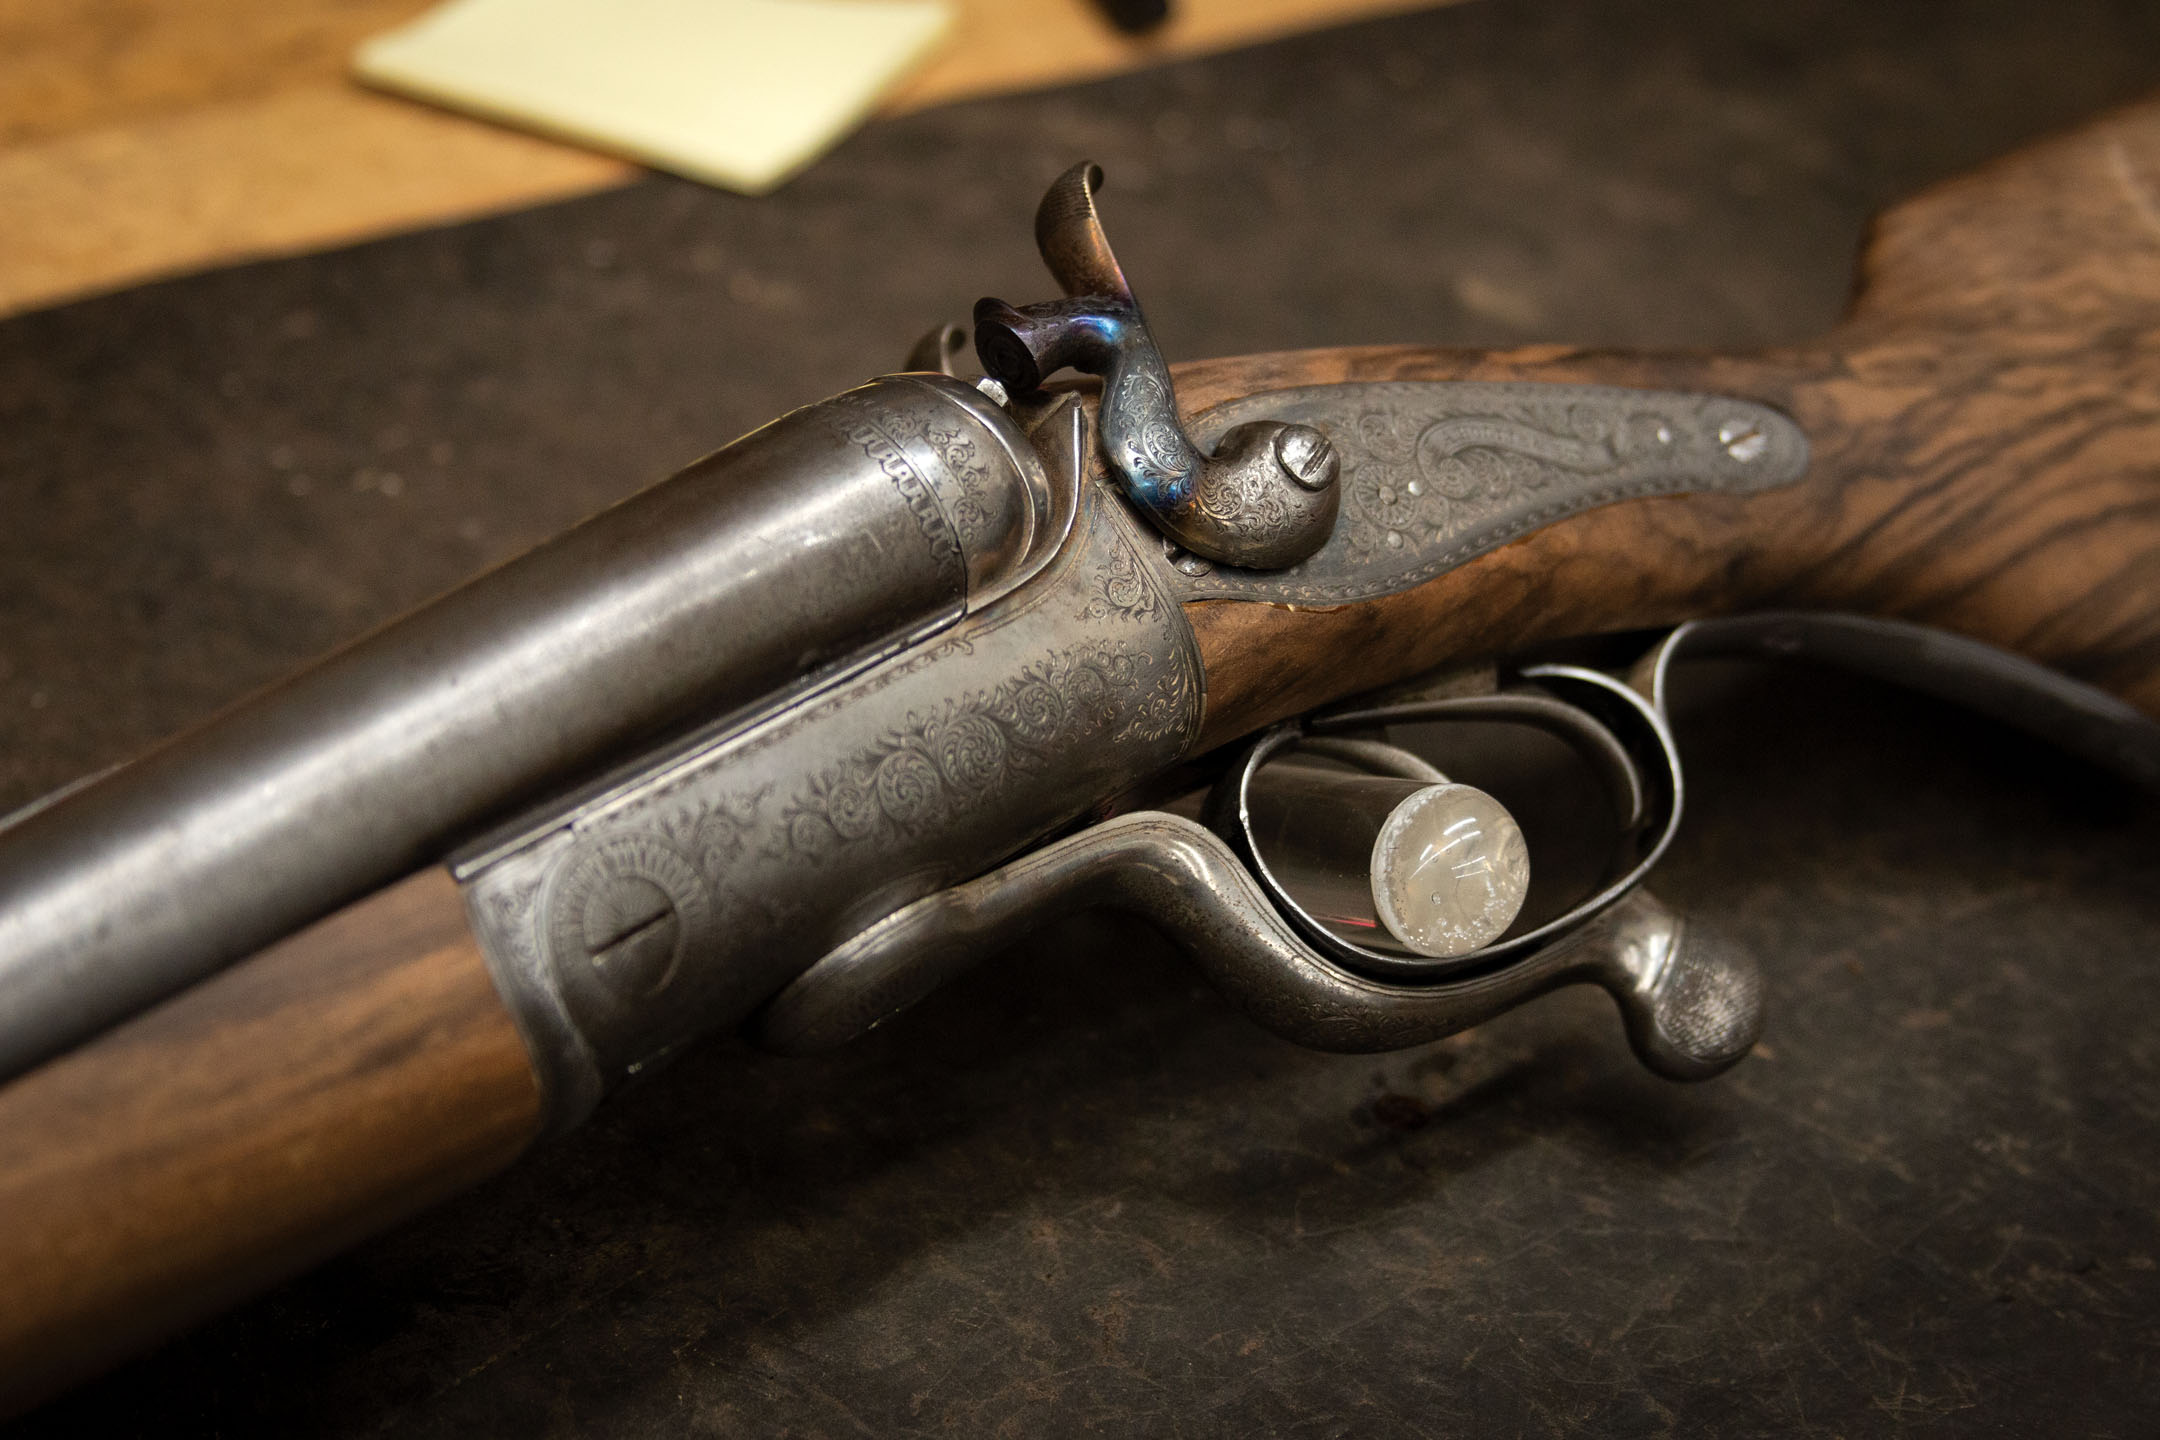 New stocks completed during an A. Hollis & Son double rifle restoration project